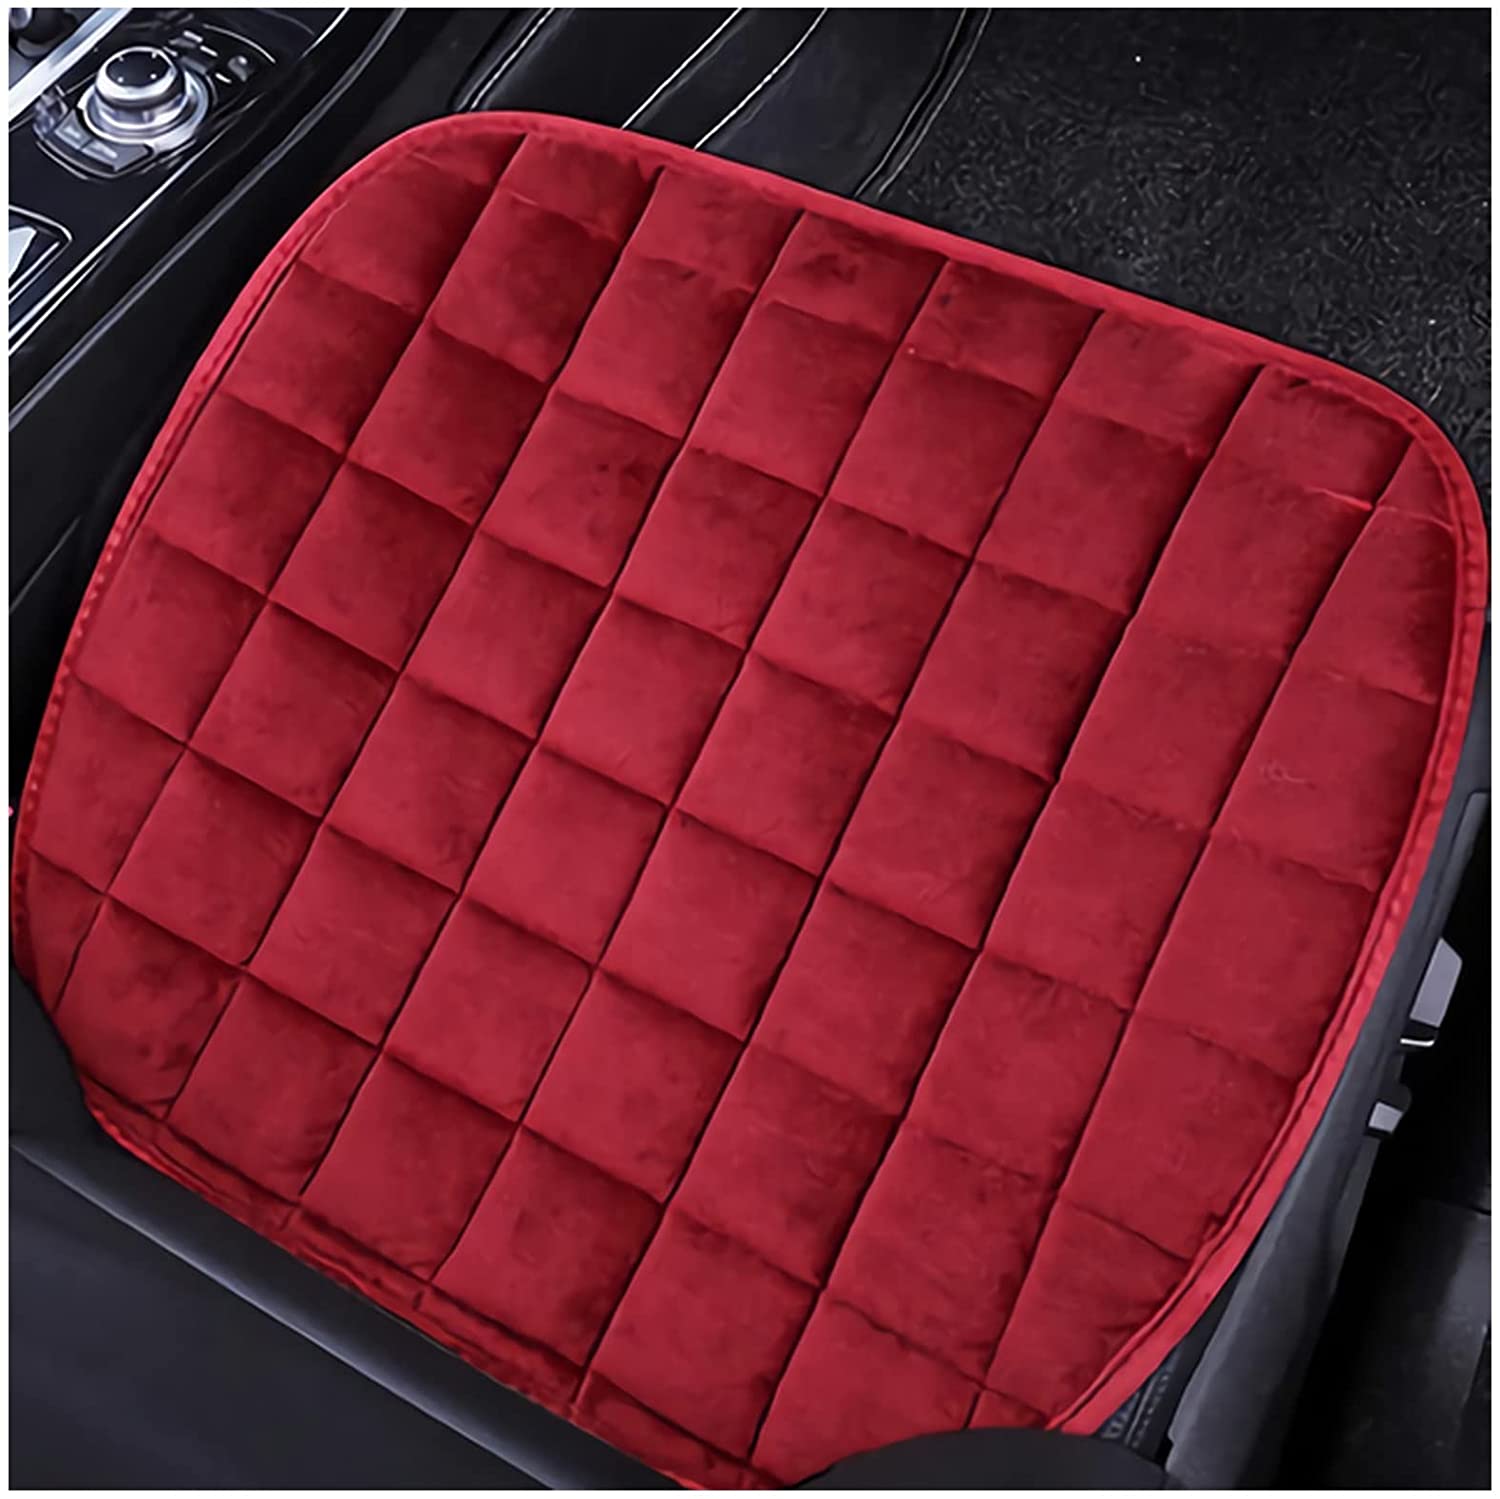 bamutech Seat Cushion Car Seat Cover Fit Truck SUV Van Front Rear Flake Cloth Cushion Non-Slip Winter Car Protector Mat Pad Keep Warm Universal Seat Cushion Chair (Size : Red Front 1)